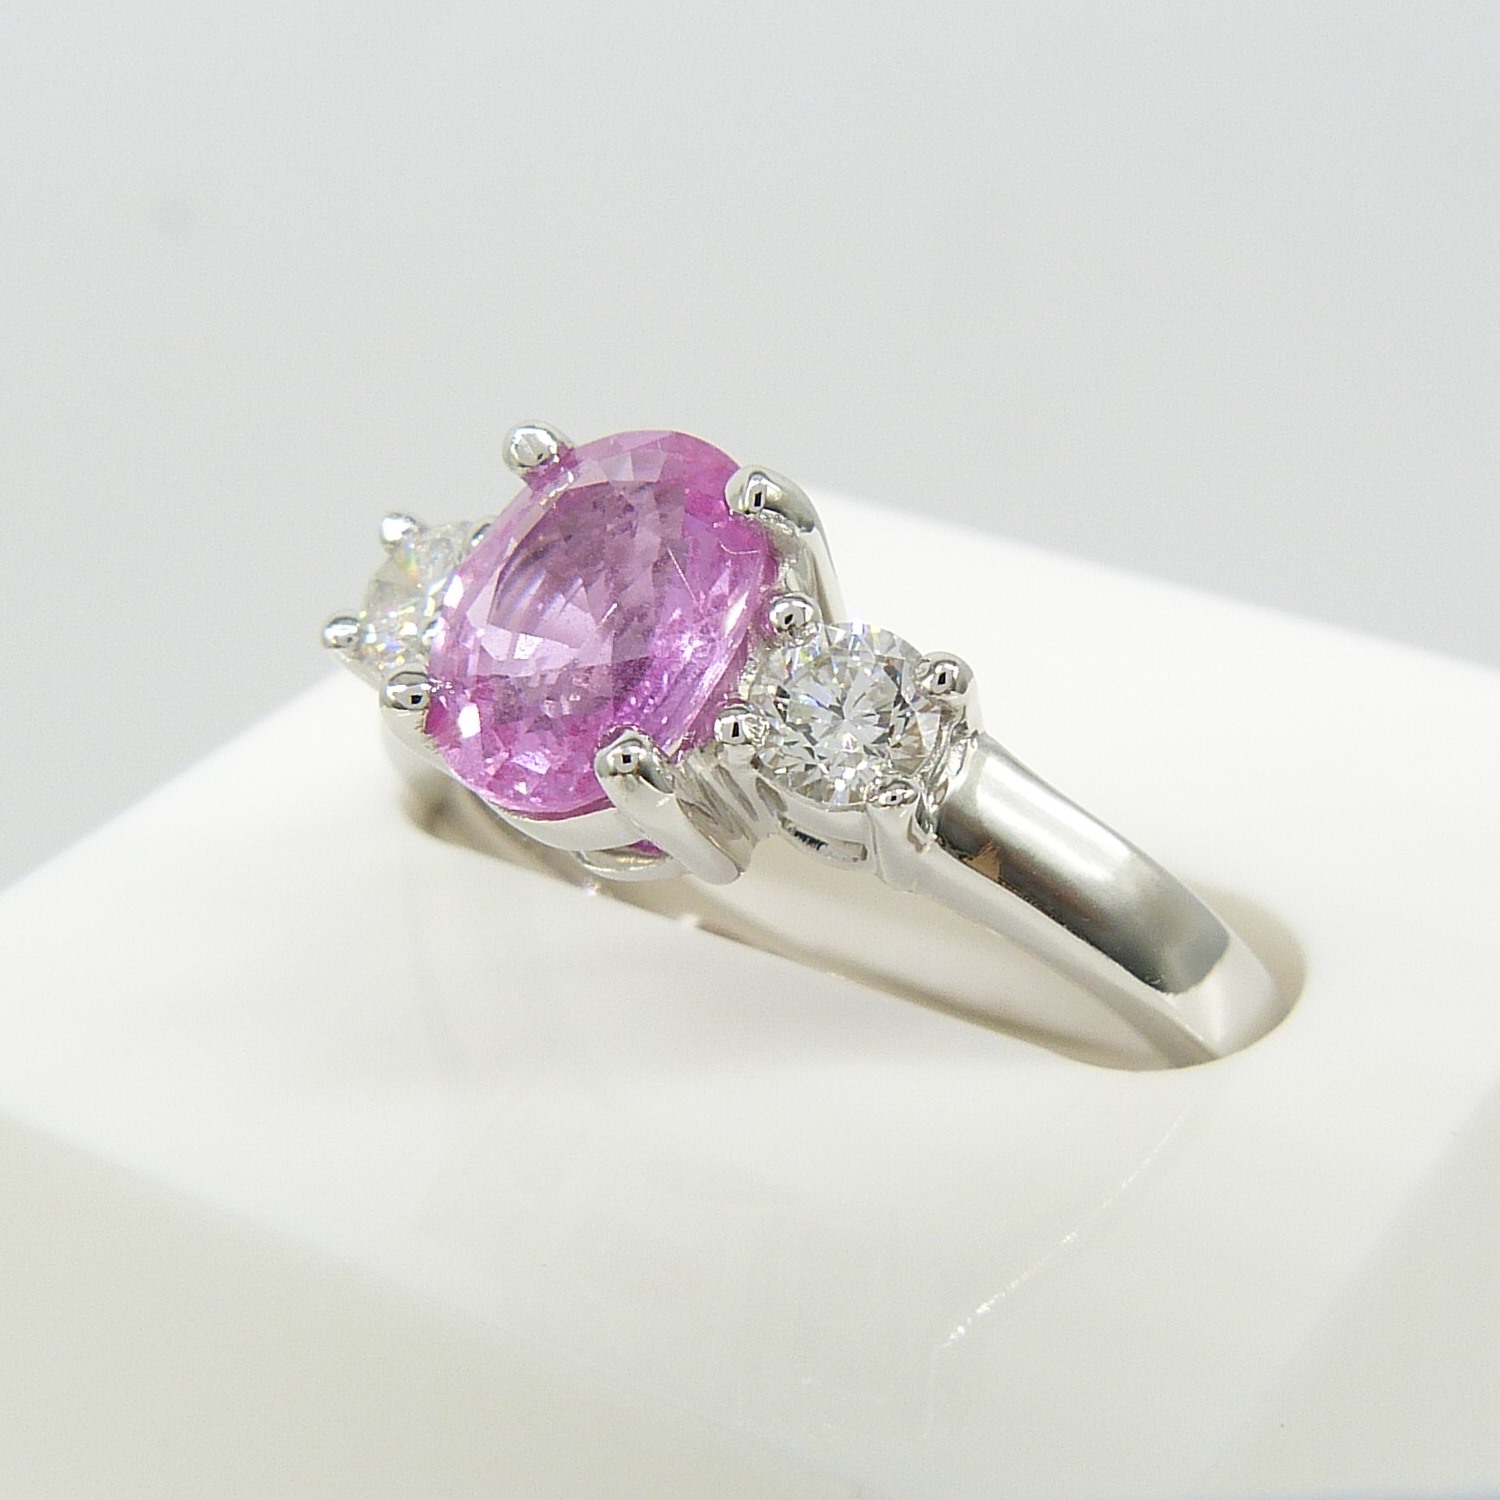 1.50 carat pink sapphire and 0.35 carat diamond 3-stone dress ring in 18ct white gold - Image 8 of 8